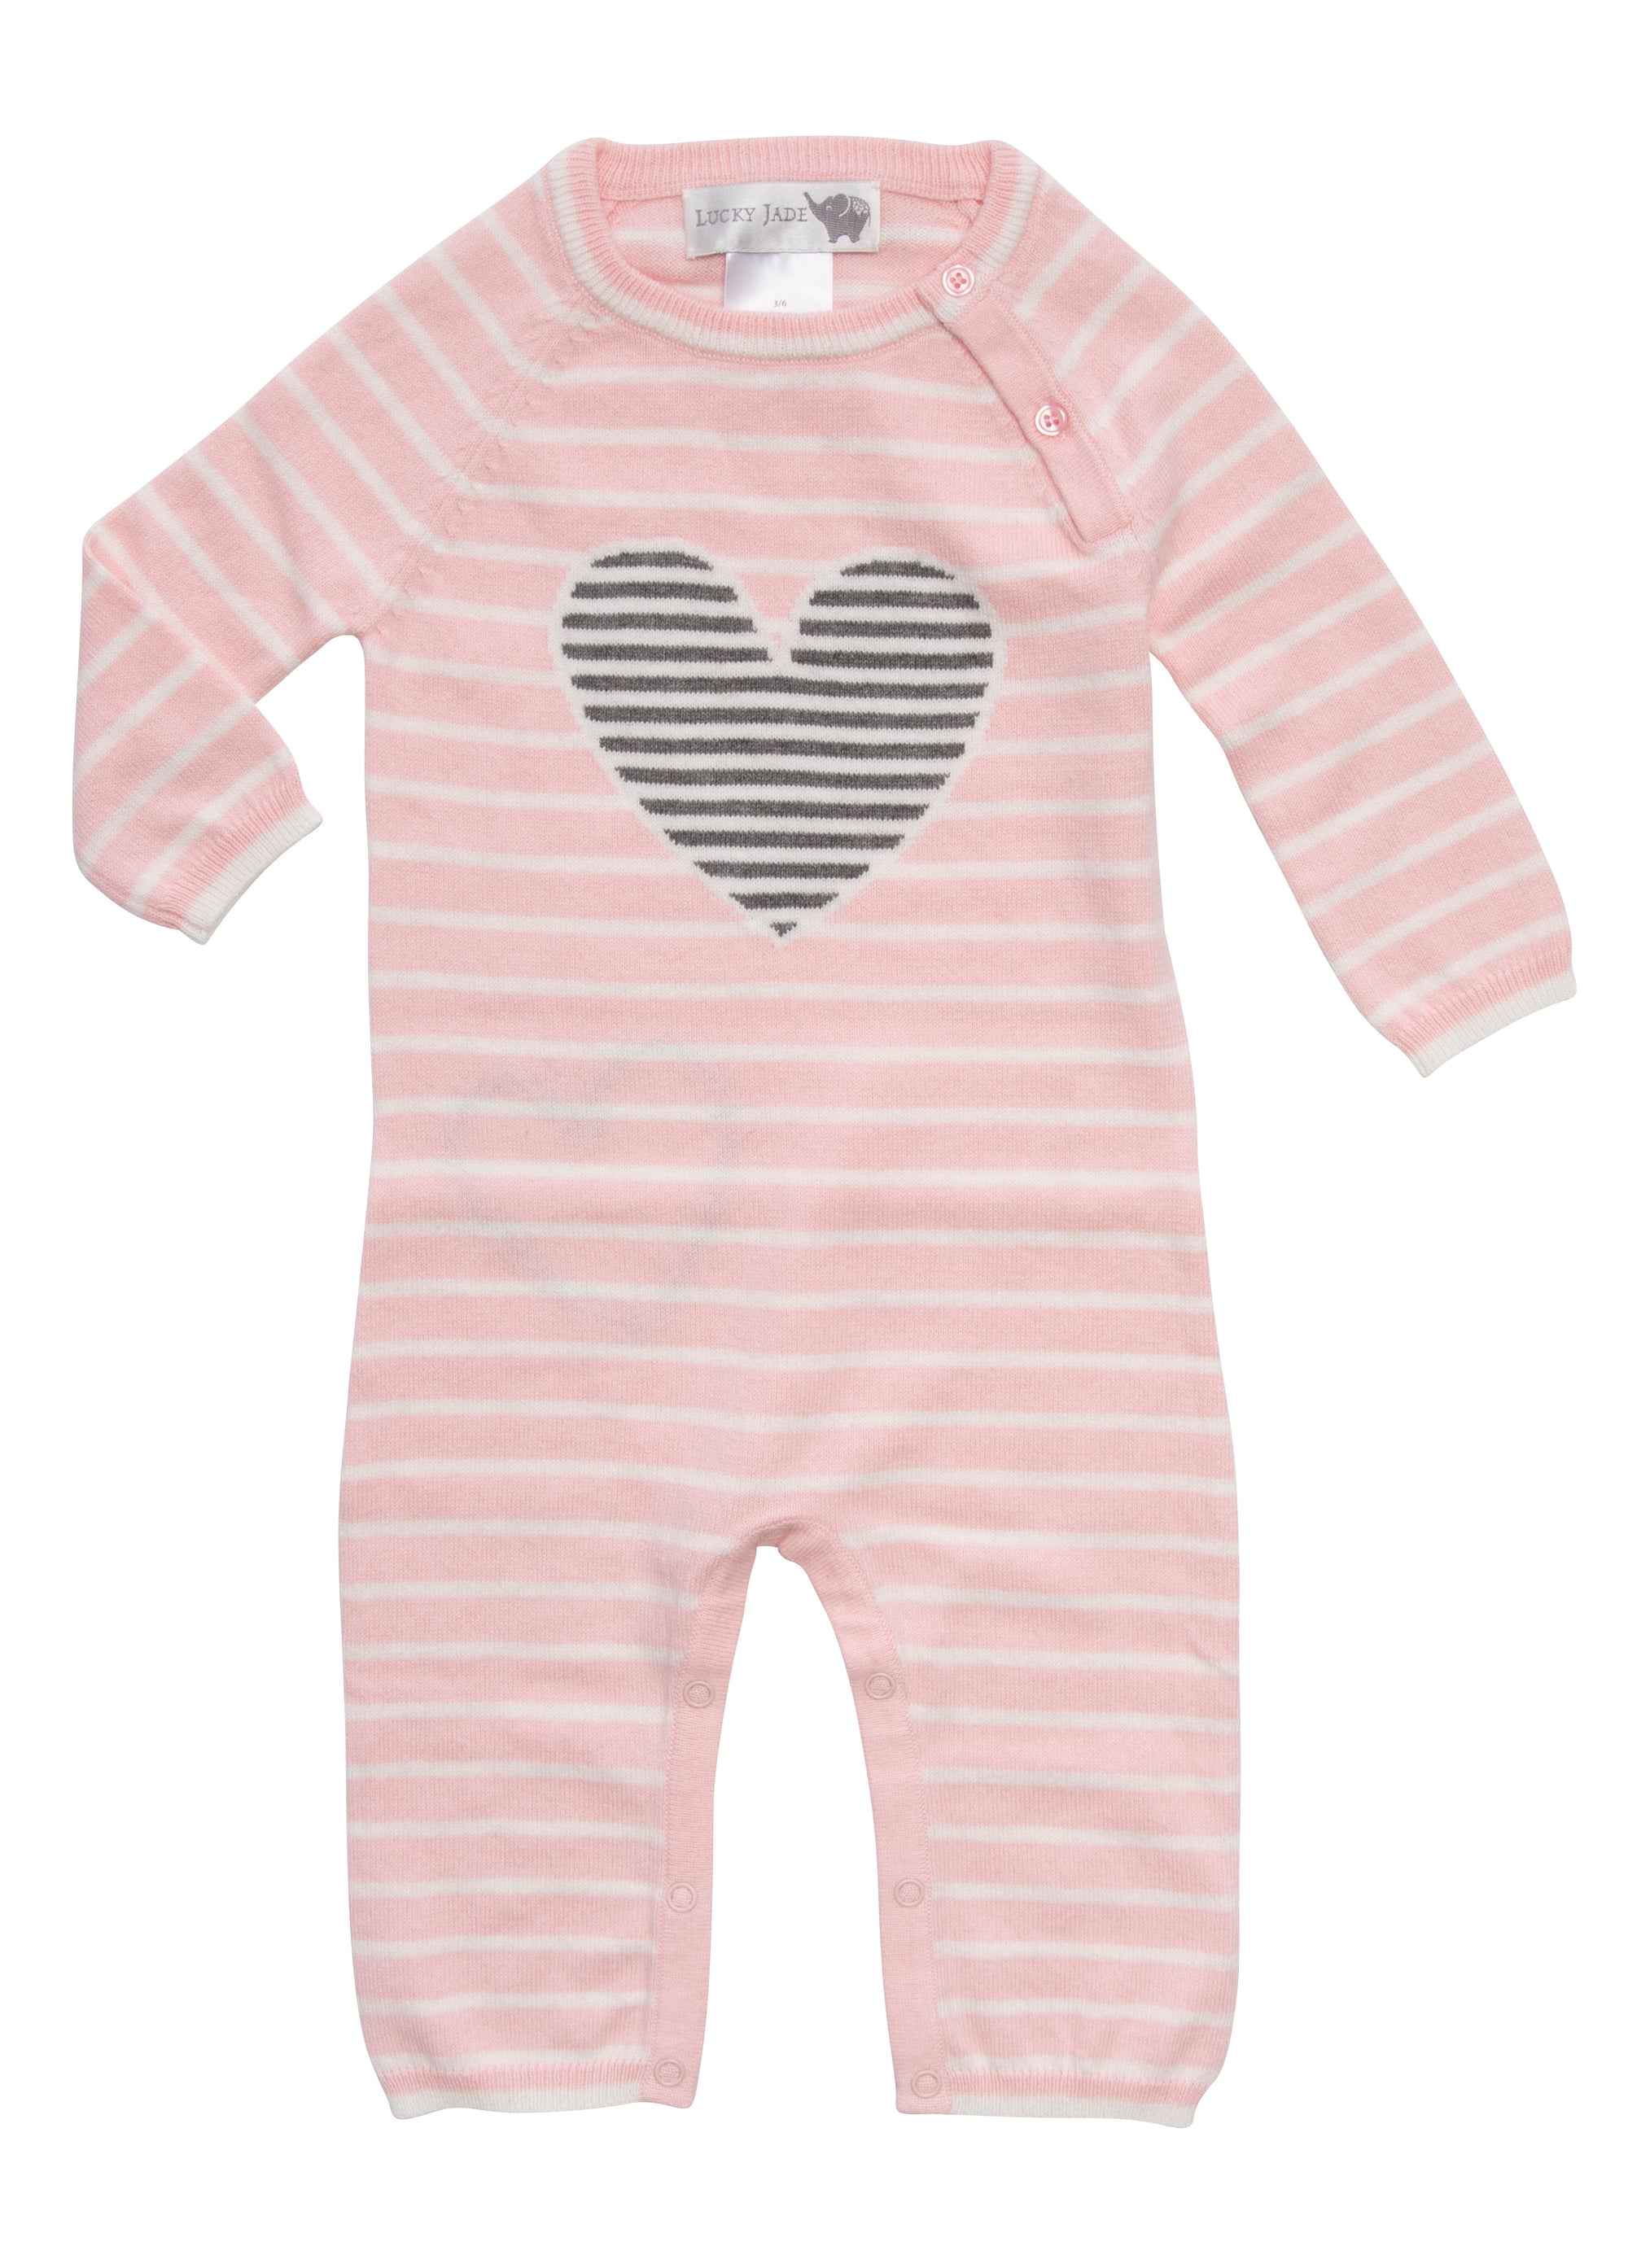 Sweetheart coverall with easy leg snap closure sold by Lucky Jade Kids baby boutique. baby girl valentine outfit pink heart coverall one piece baby outfits #luckyjadekids #kidsclothingboutique #babyoutifts #kidsclothes #matchingdresses